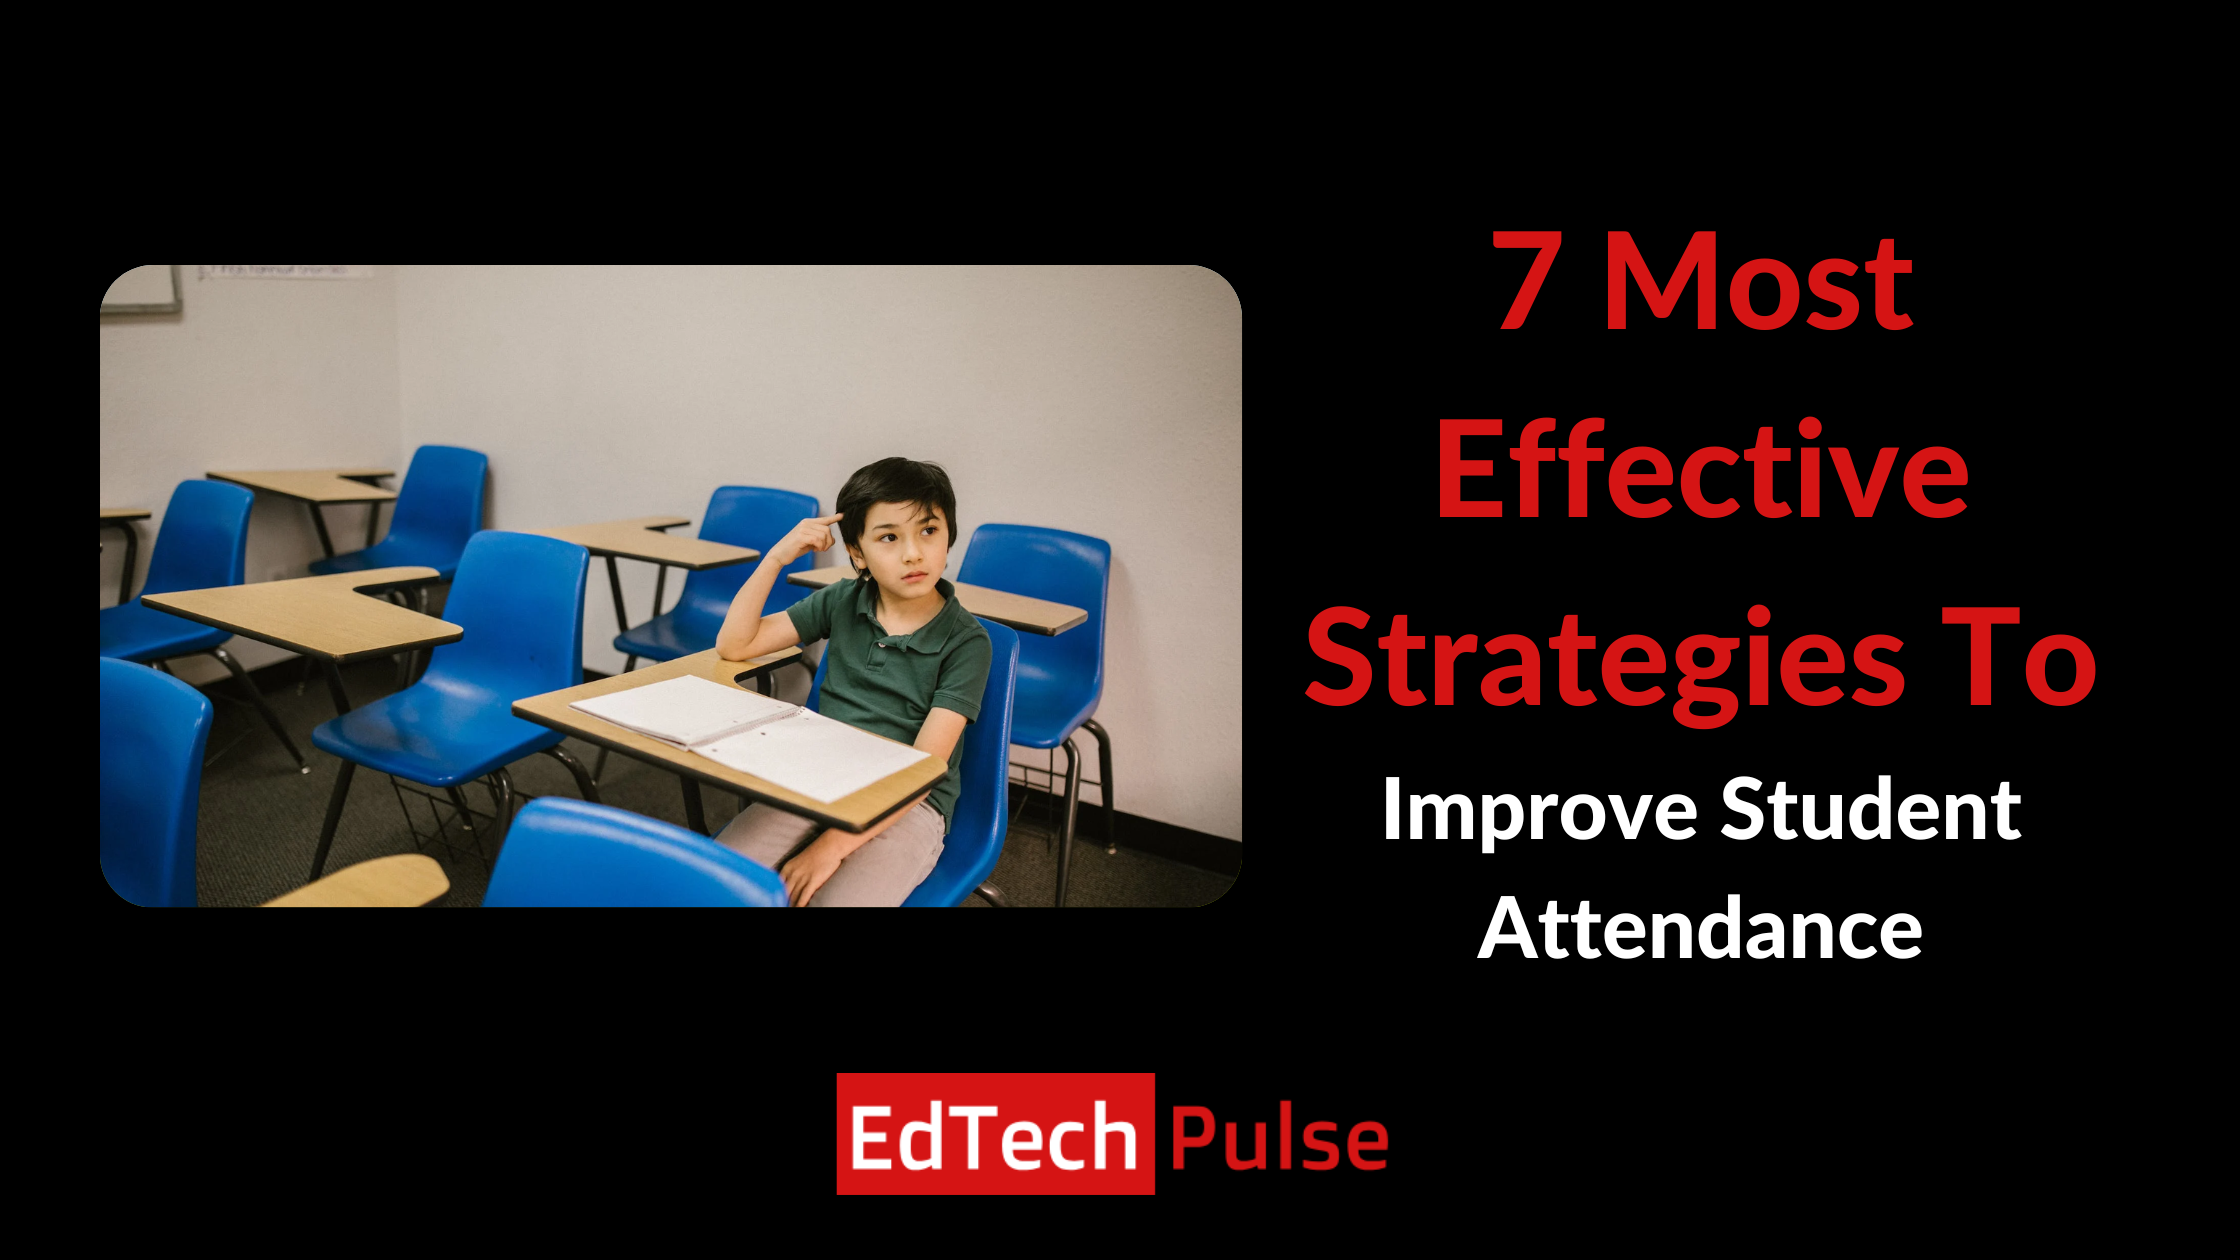 7 Most Effective Strategies To Improve Student Attendance